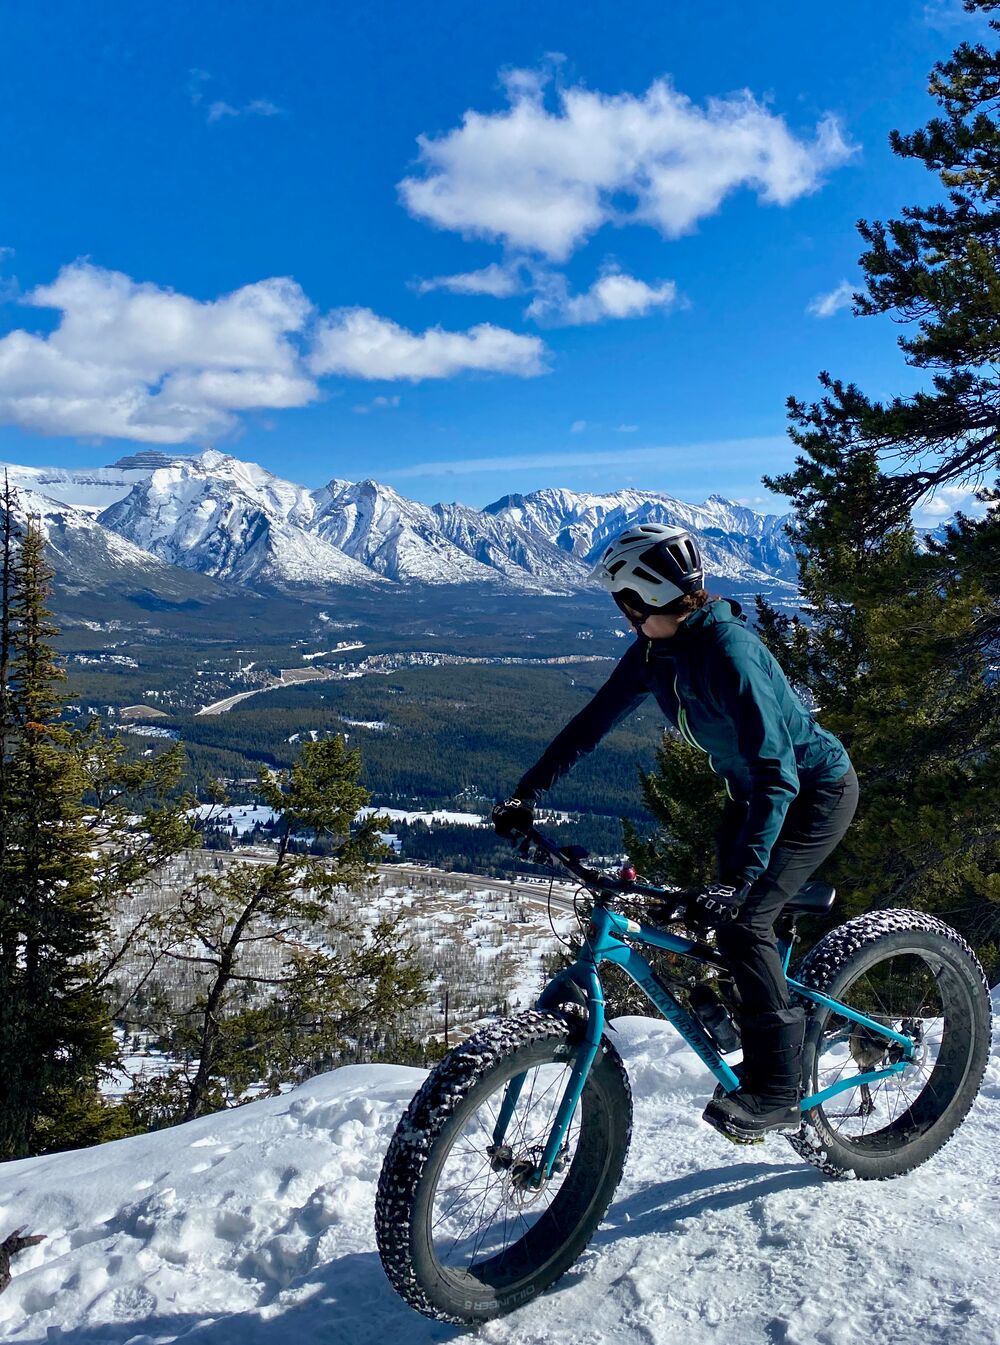 A fat biker looks out over a ridge on the Tunnel Mountain trails in winter in Banff National Park.